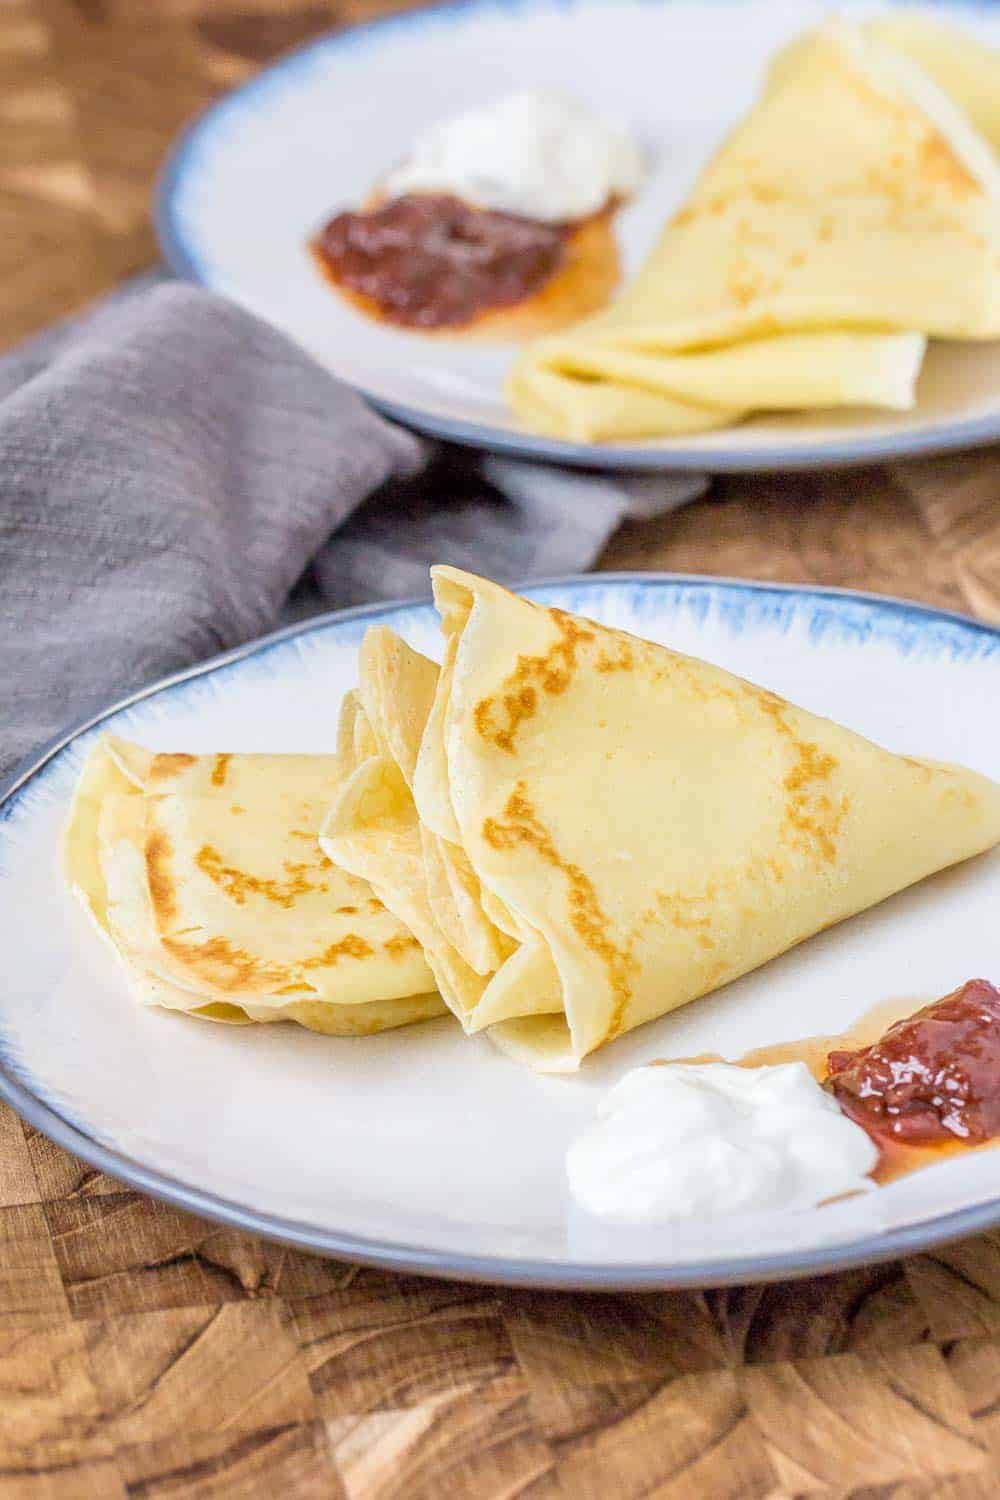 Russian crepes are delicious any time of day, but especially for breakfast.